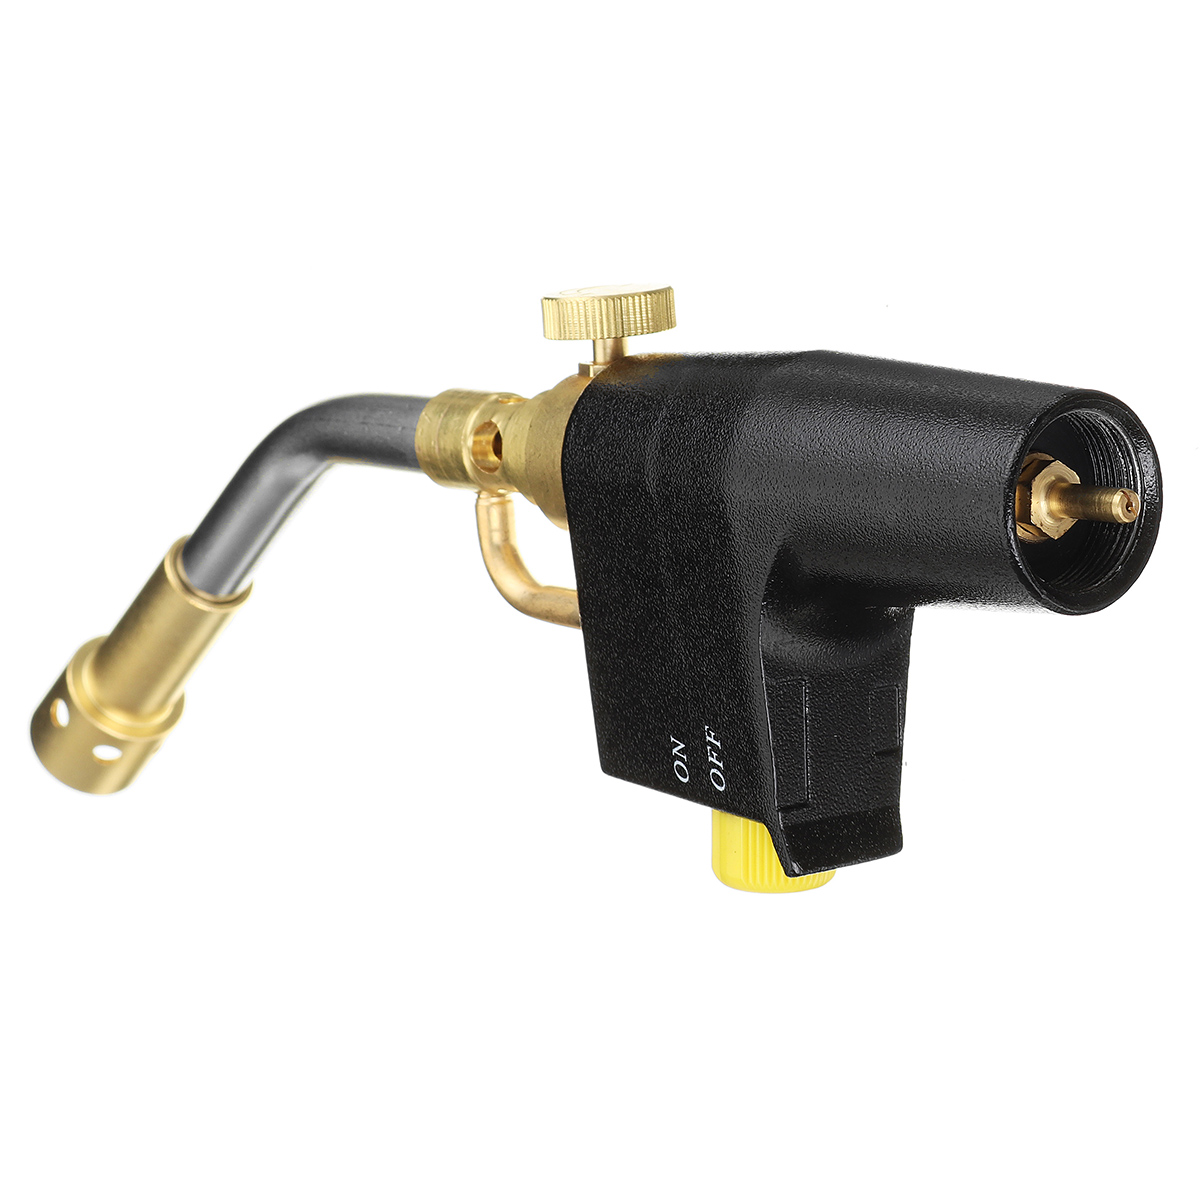 TS8000-Type-High-Temperature-Brass-Mapp-Gas-Torch-Propane-Welding-Pipe-With-a-Replaceable-Brass-Weld-1717065-7